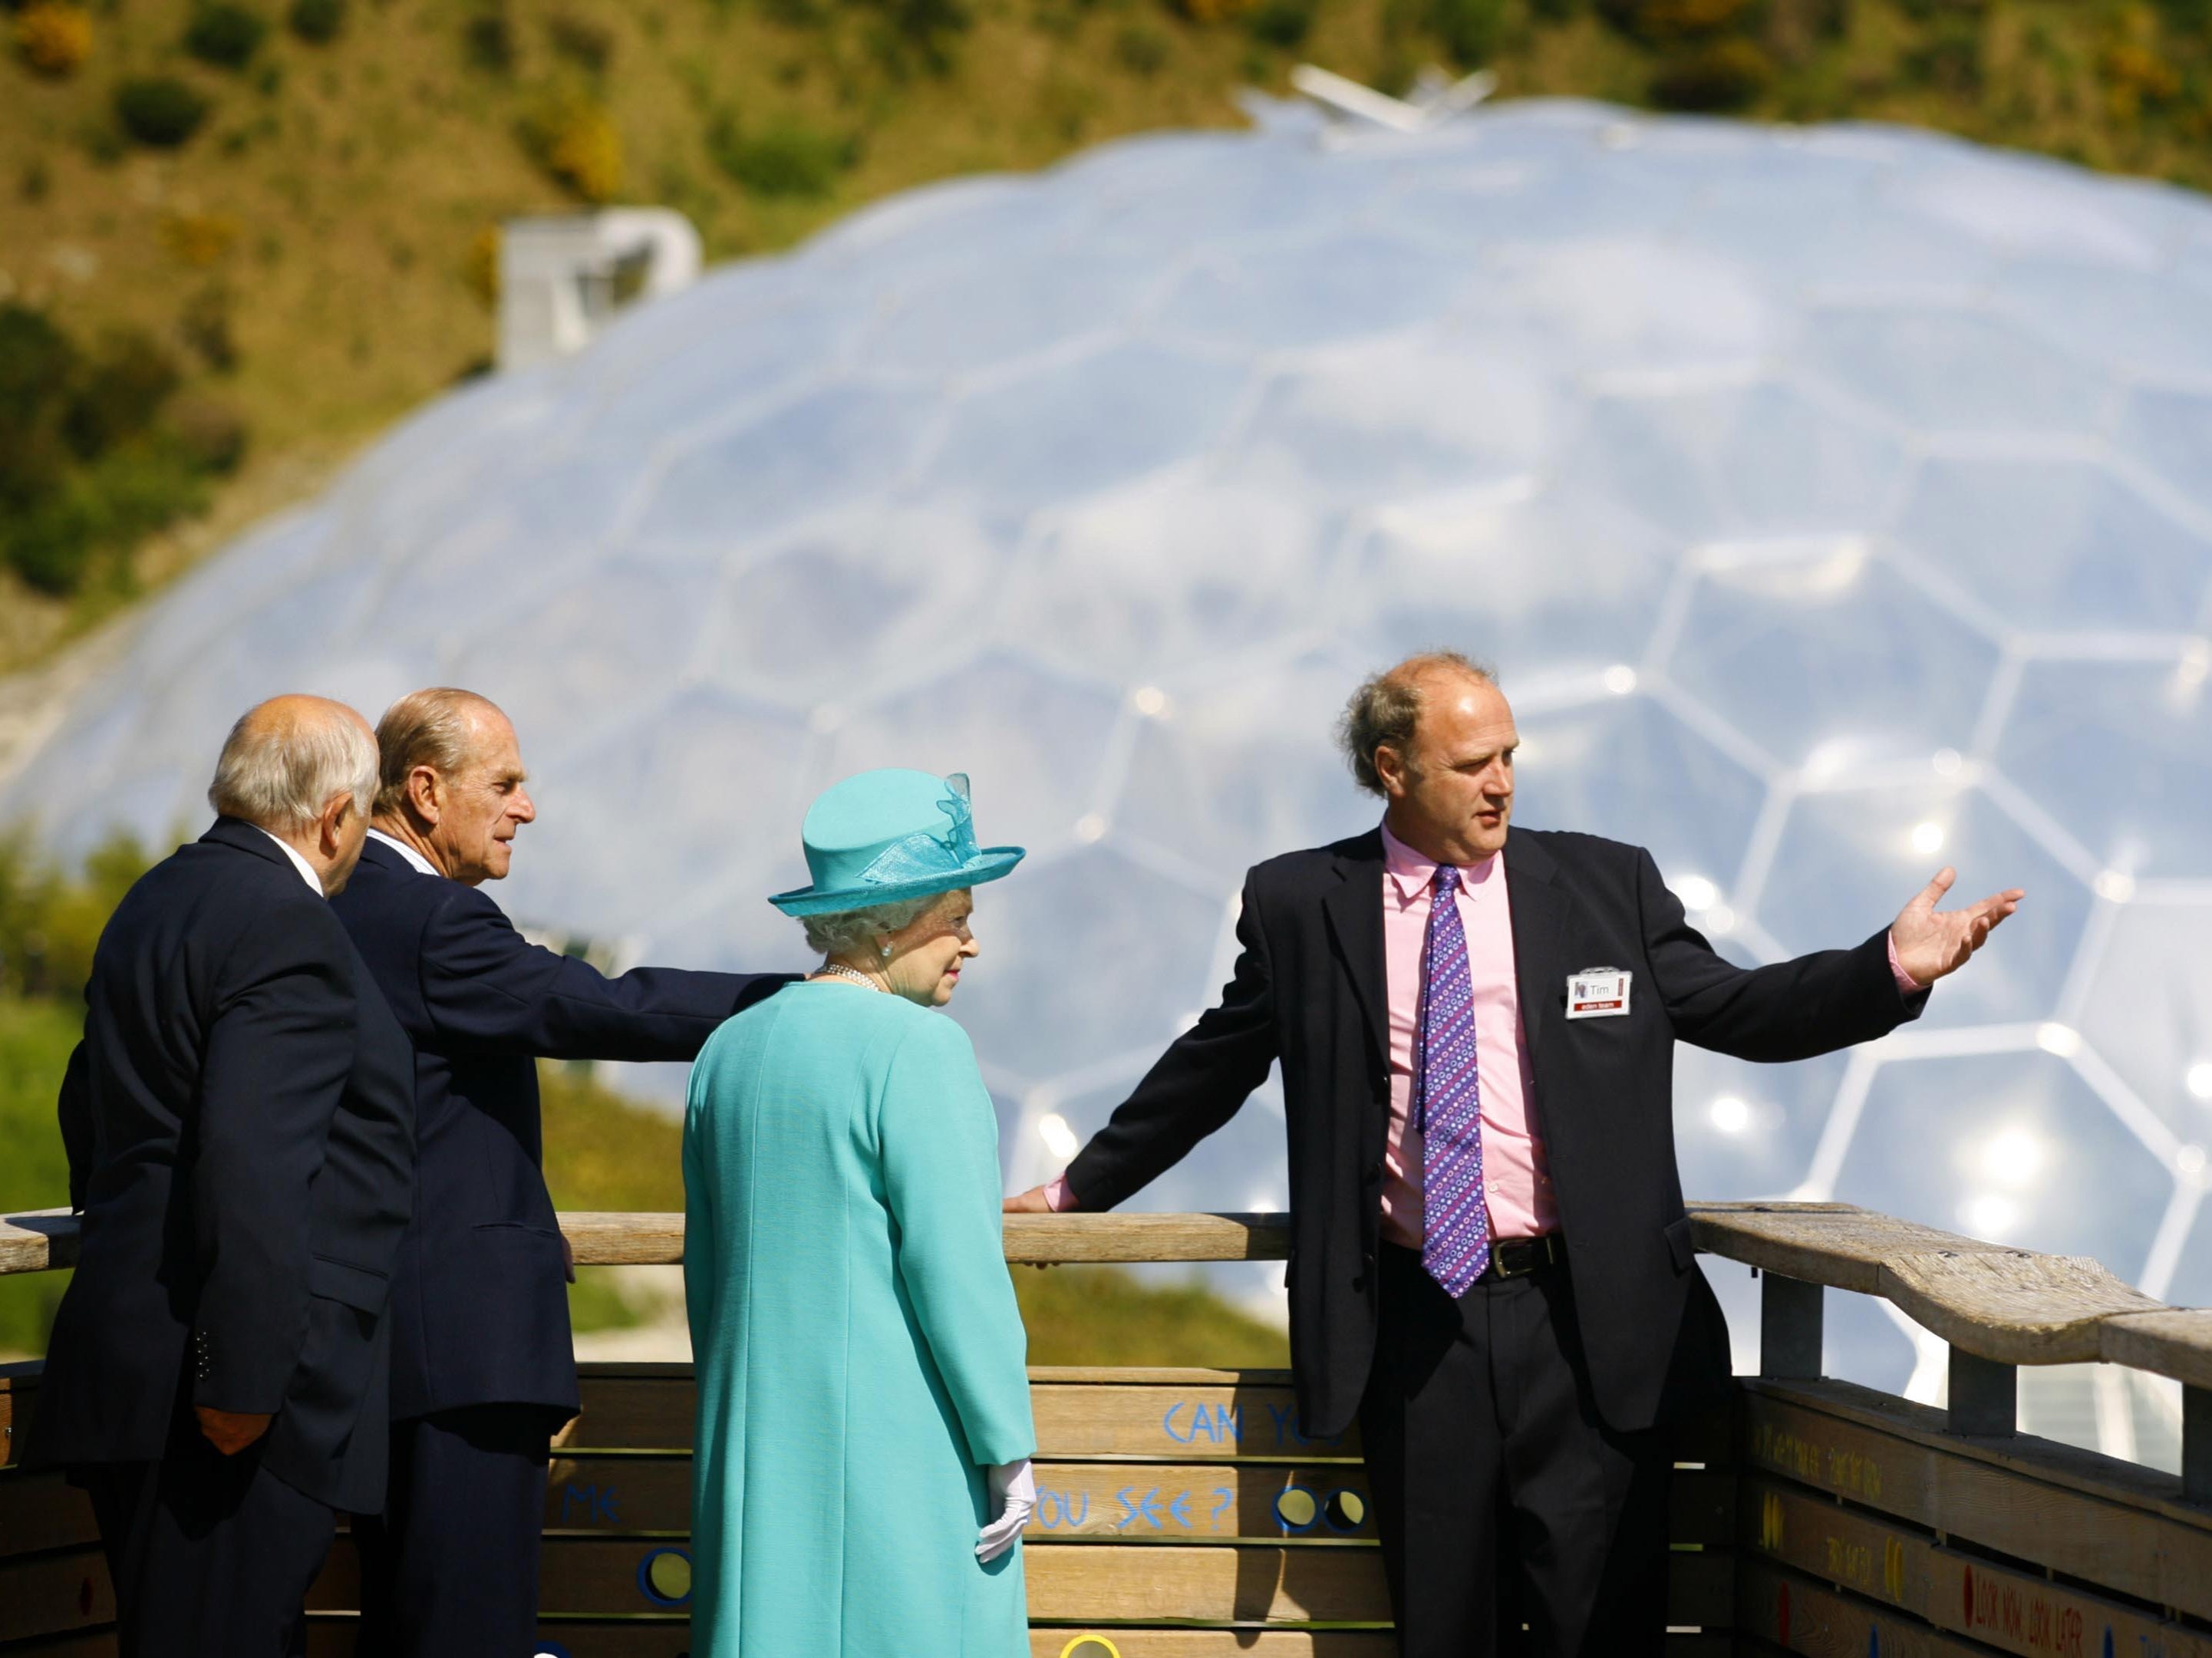 Sir Chris Smit (right) showing Queen Elizabeth II and Prince Philip around the Eden Project in Cornwall in 2006